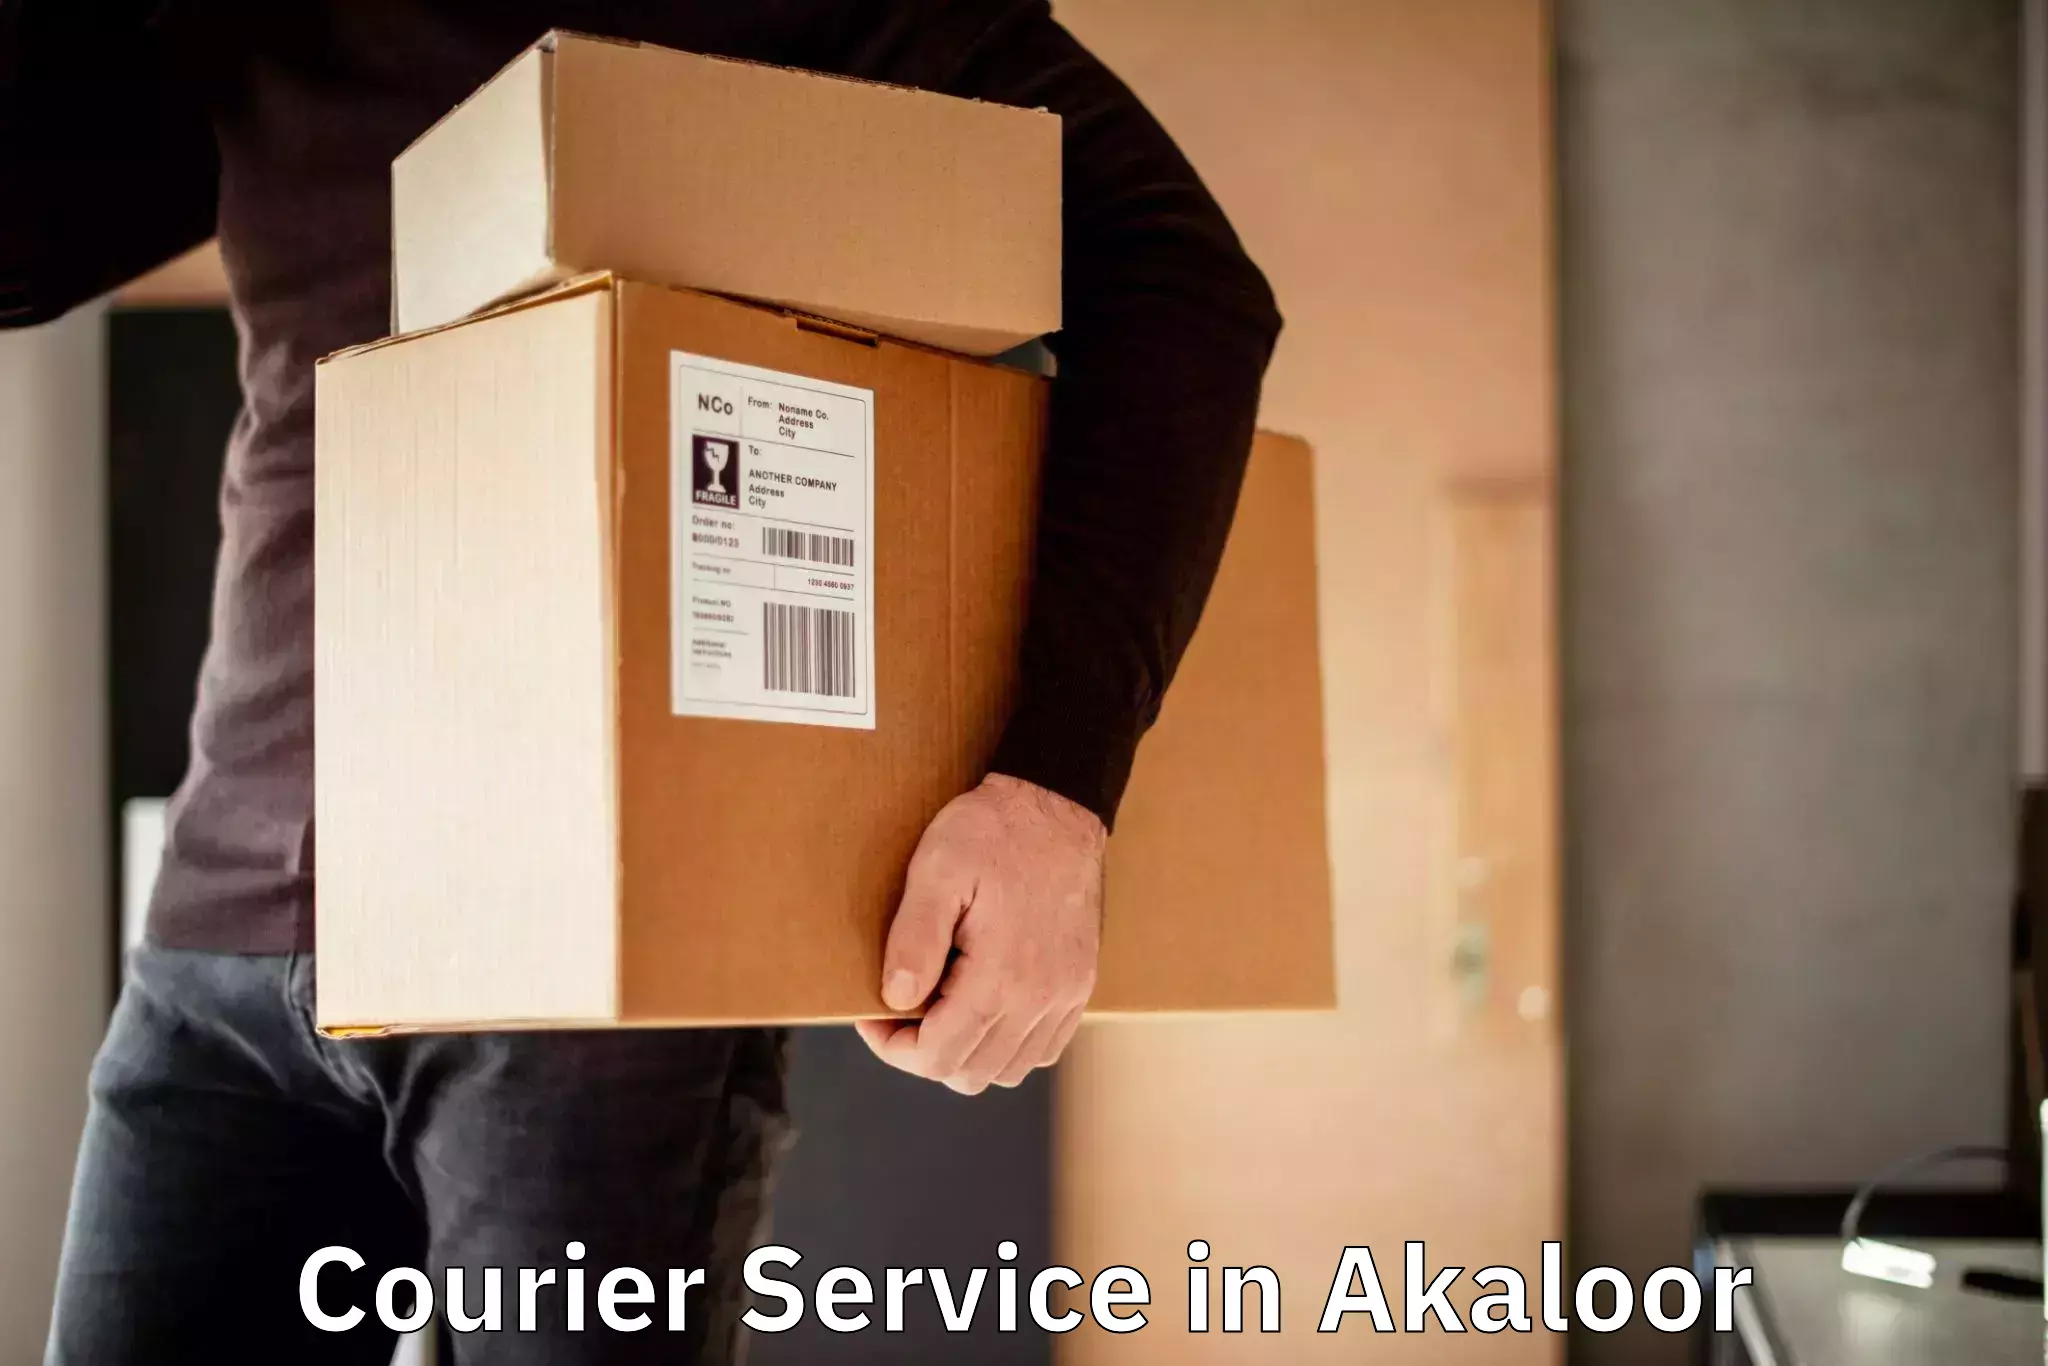 Tailored shipping plans in Akaloor